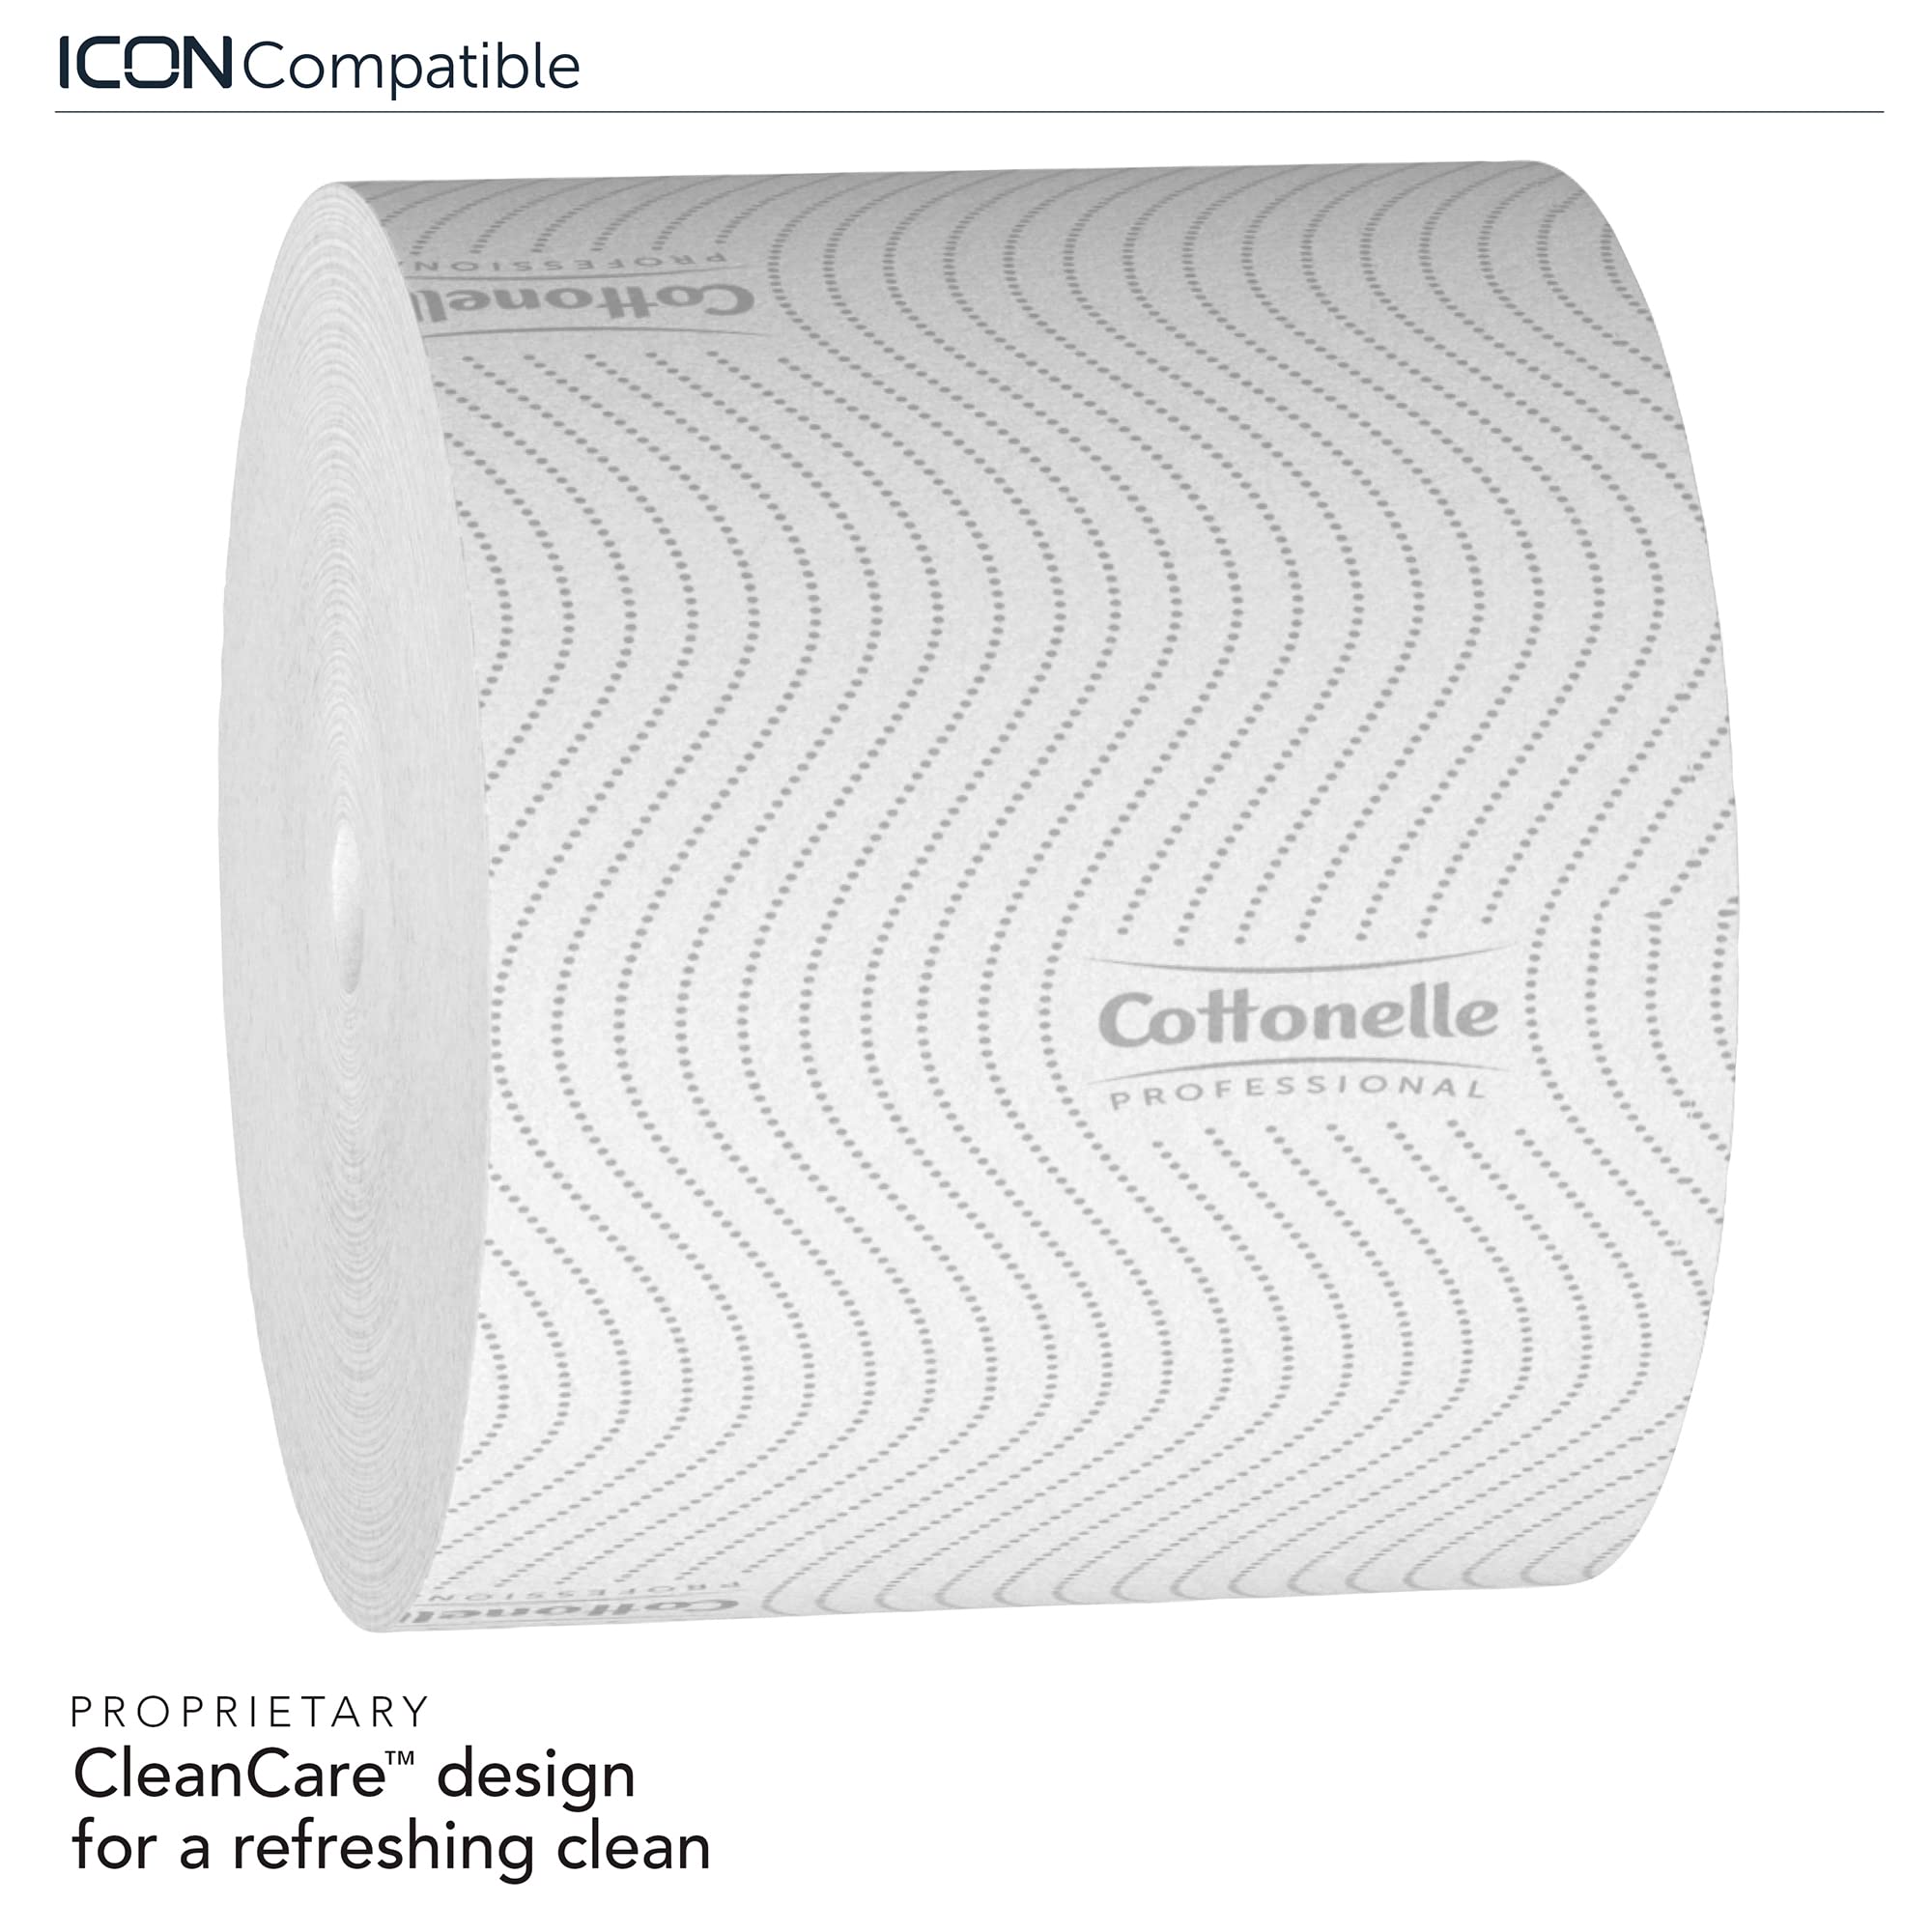 Cottonelle Paper Core High-Capacity Standard Toilet Paper (53862), with CleanCare Design, 2-Ply, White, 36 Rolls/Case, 900 Sheets/Roll, 32,400 Sheets/Case